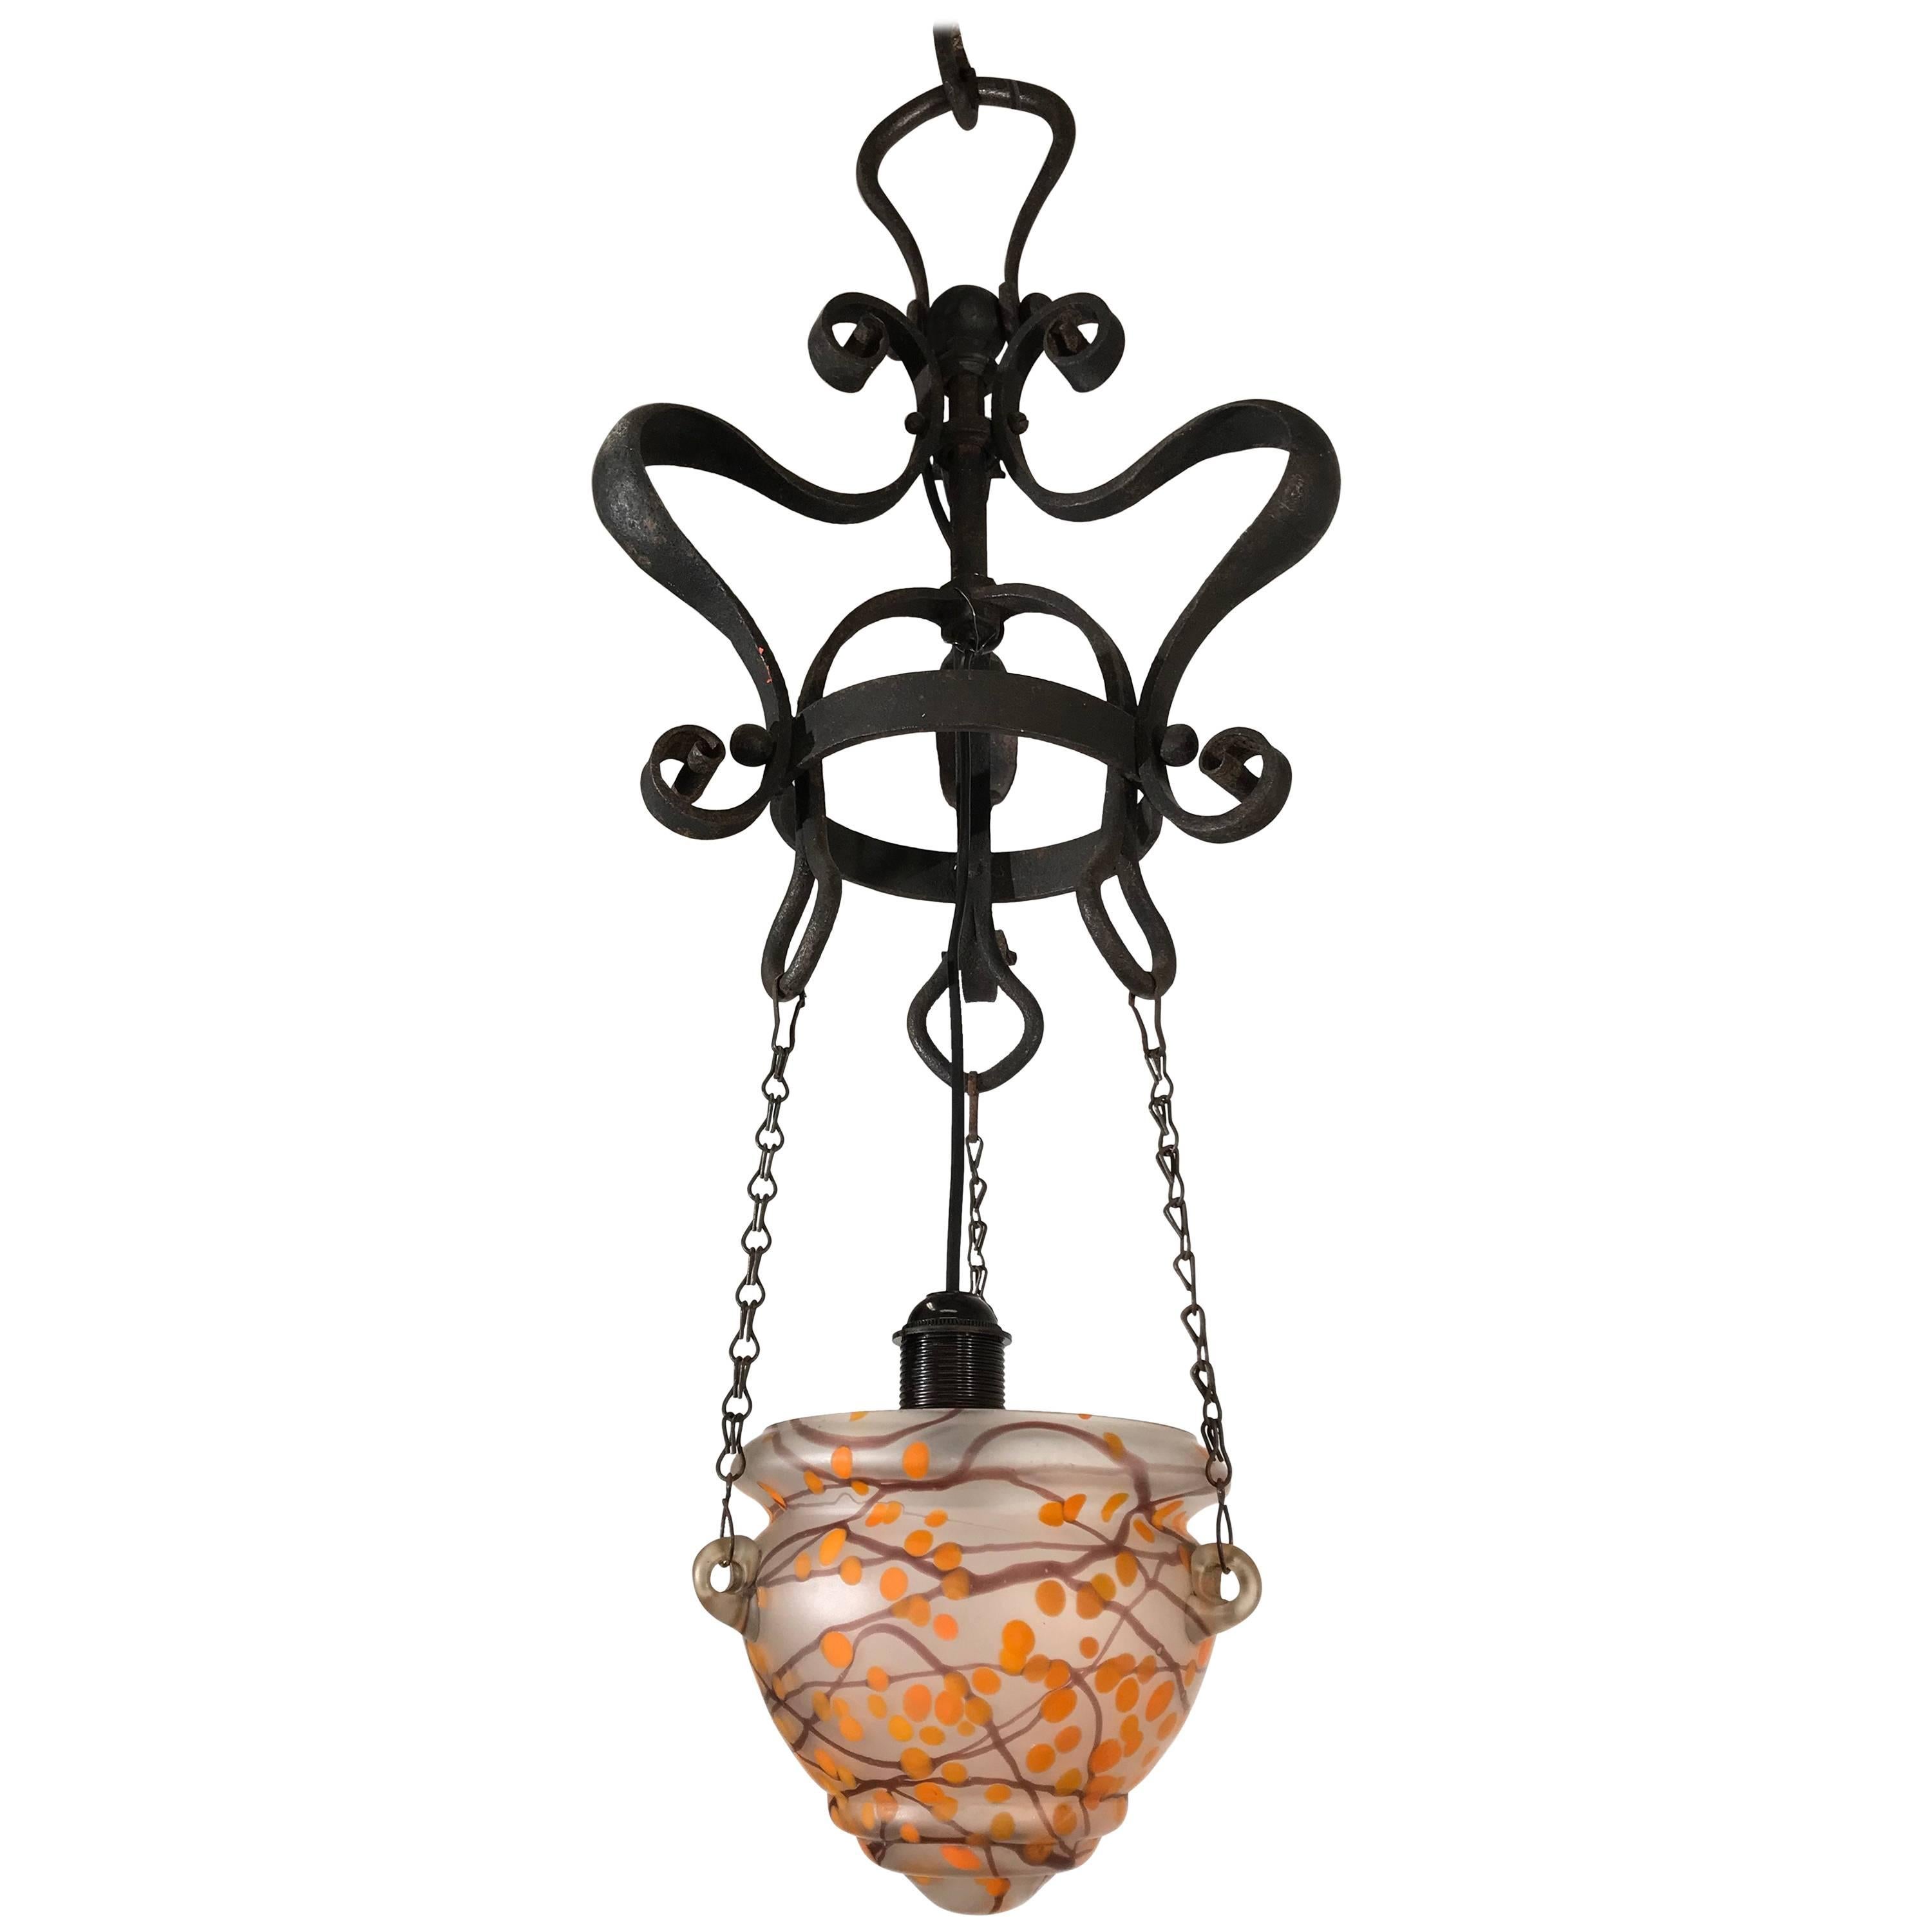 Art Nouveau Wrought Iron Pendant Light with Mouth Blown Artistic Glass Shade